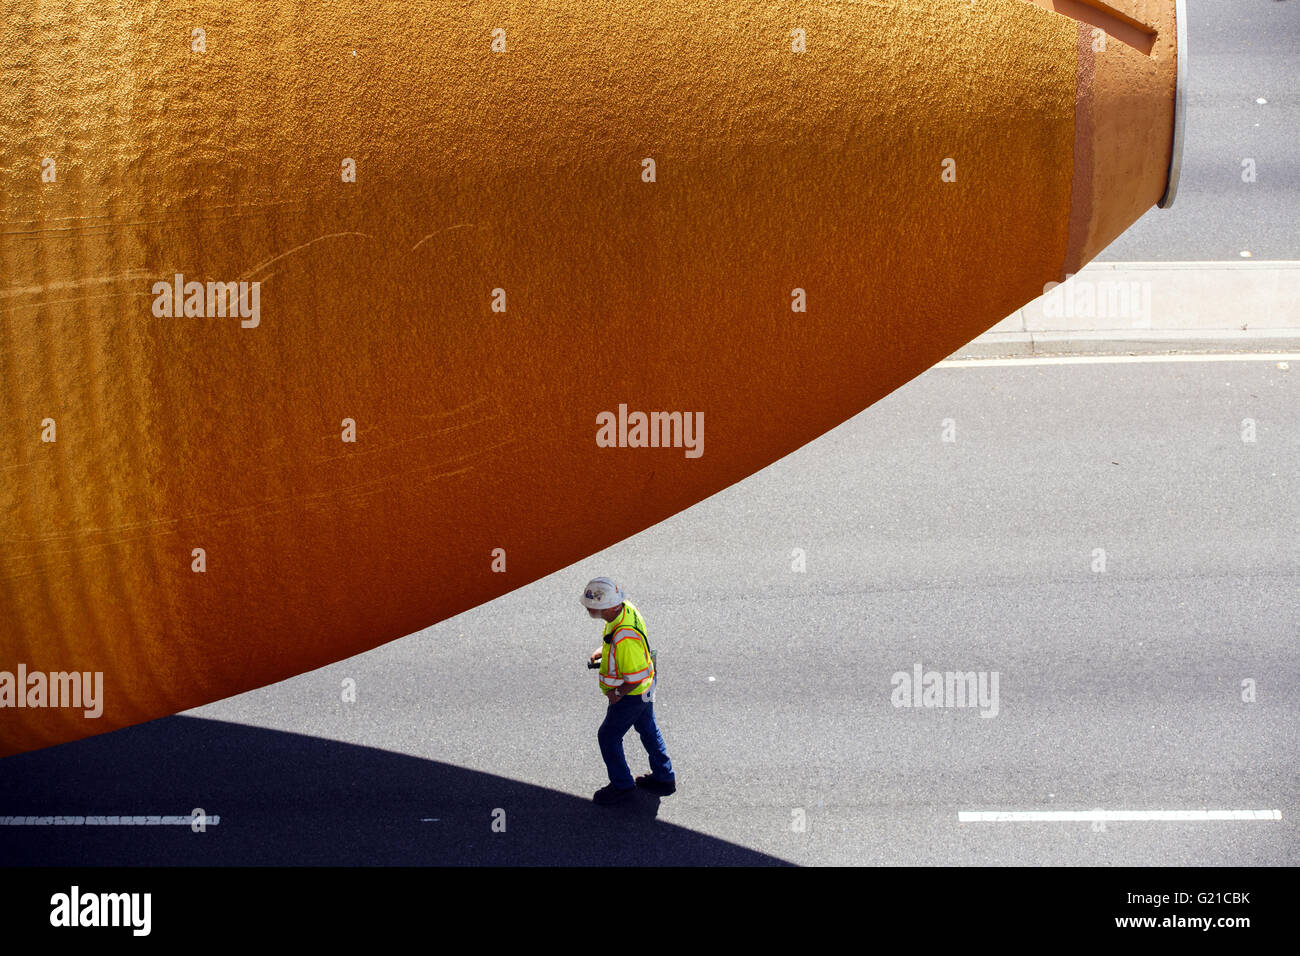 Inglewood, California, USA. 21st May, 2016. A worker walks underneath the ET-94 fuel tank for the Space Shuttle makes its way on Manchester past The Forum from Marina Del Rey to the California Science Center on Saturday, May 21, 2016 in Inglewood, Calif. NASA's last remaining external fuel tank for the Space Shuttle, ET-94, traveled over 16 miles to be united with the Endeavor, where the 66,000 pound fuel tank will be displayed like it is ready to launch. © 2016 Patrick T. Fallon © Patrick Fallon/ZUMA Wire/Alamy Live News Stock Photo